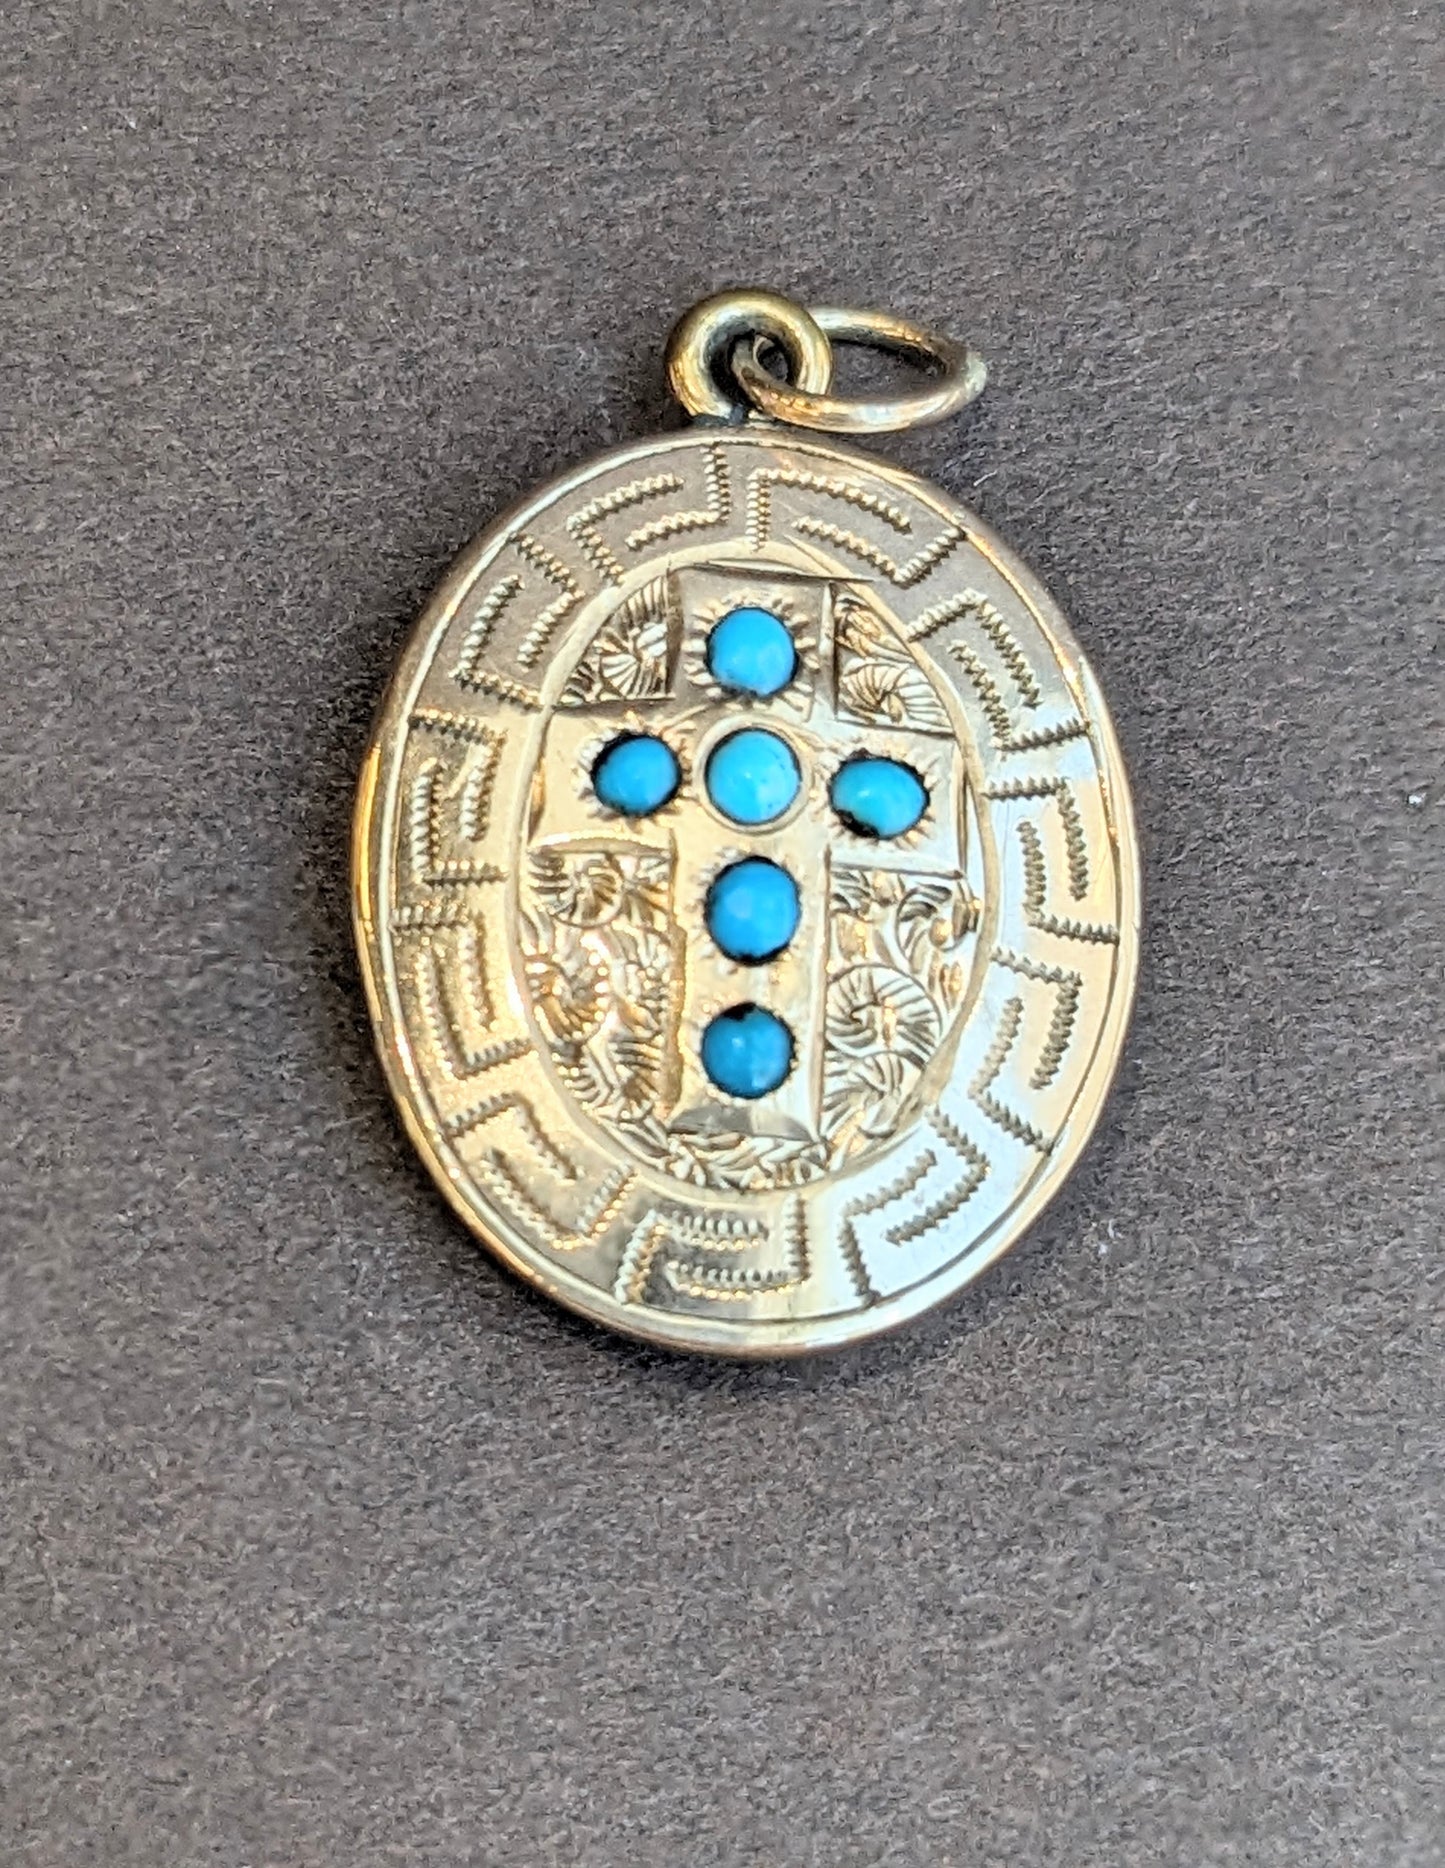 9k Turquoise Locket with Photograph Circa 1910